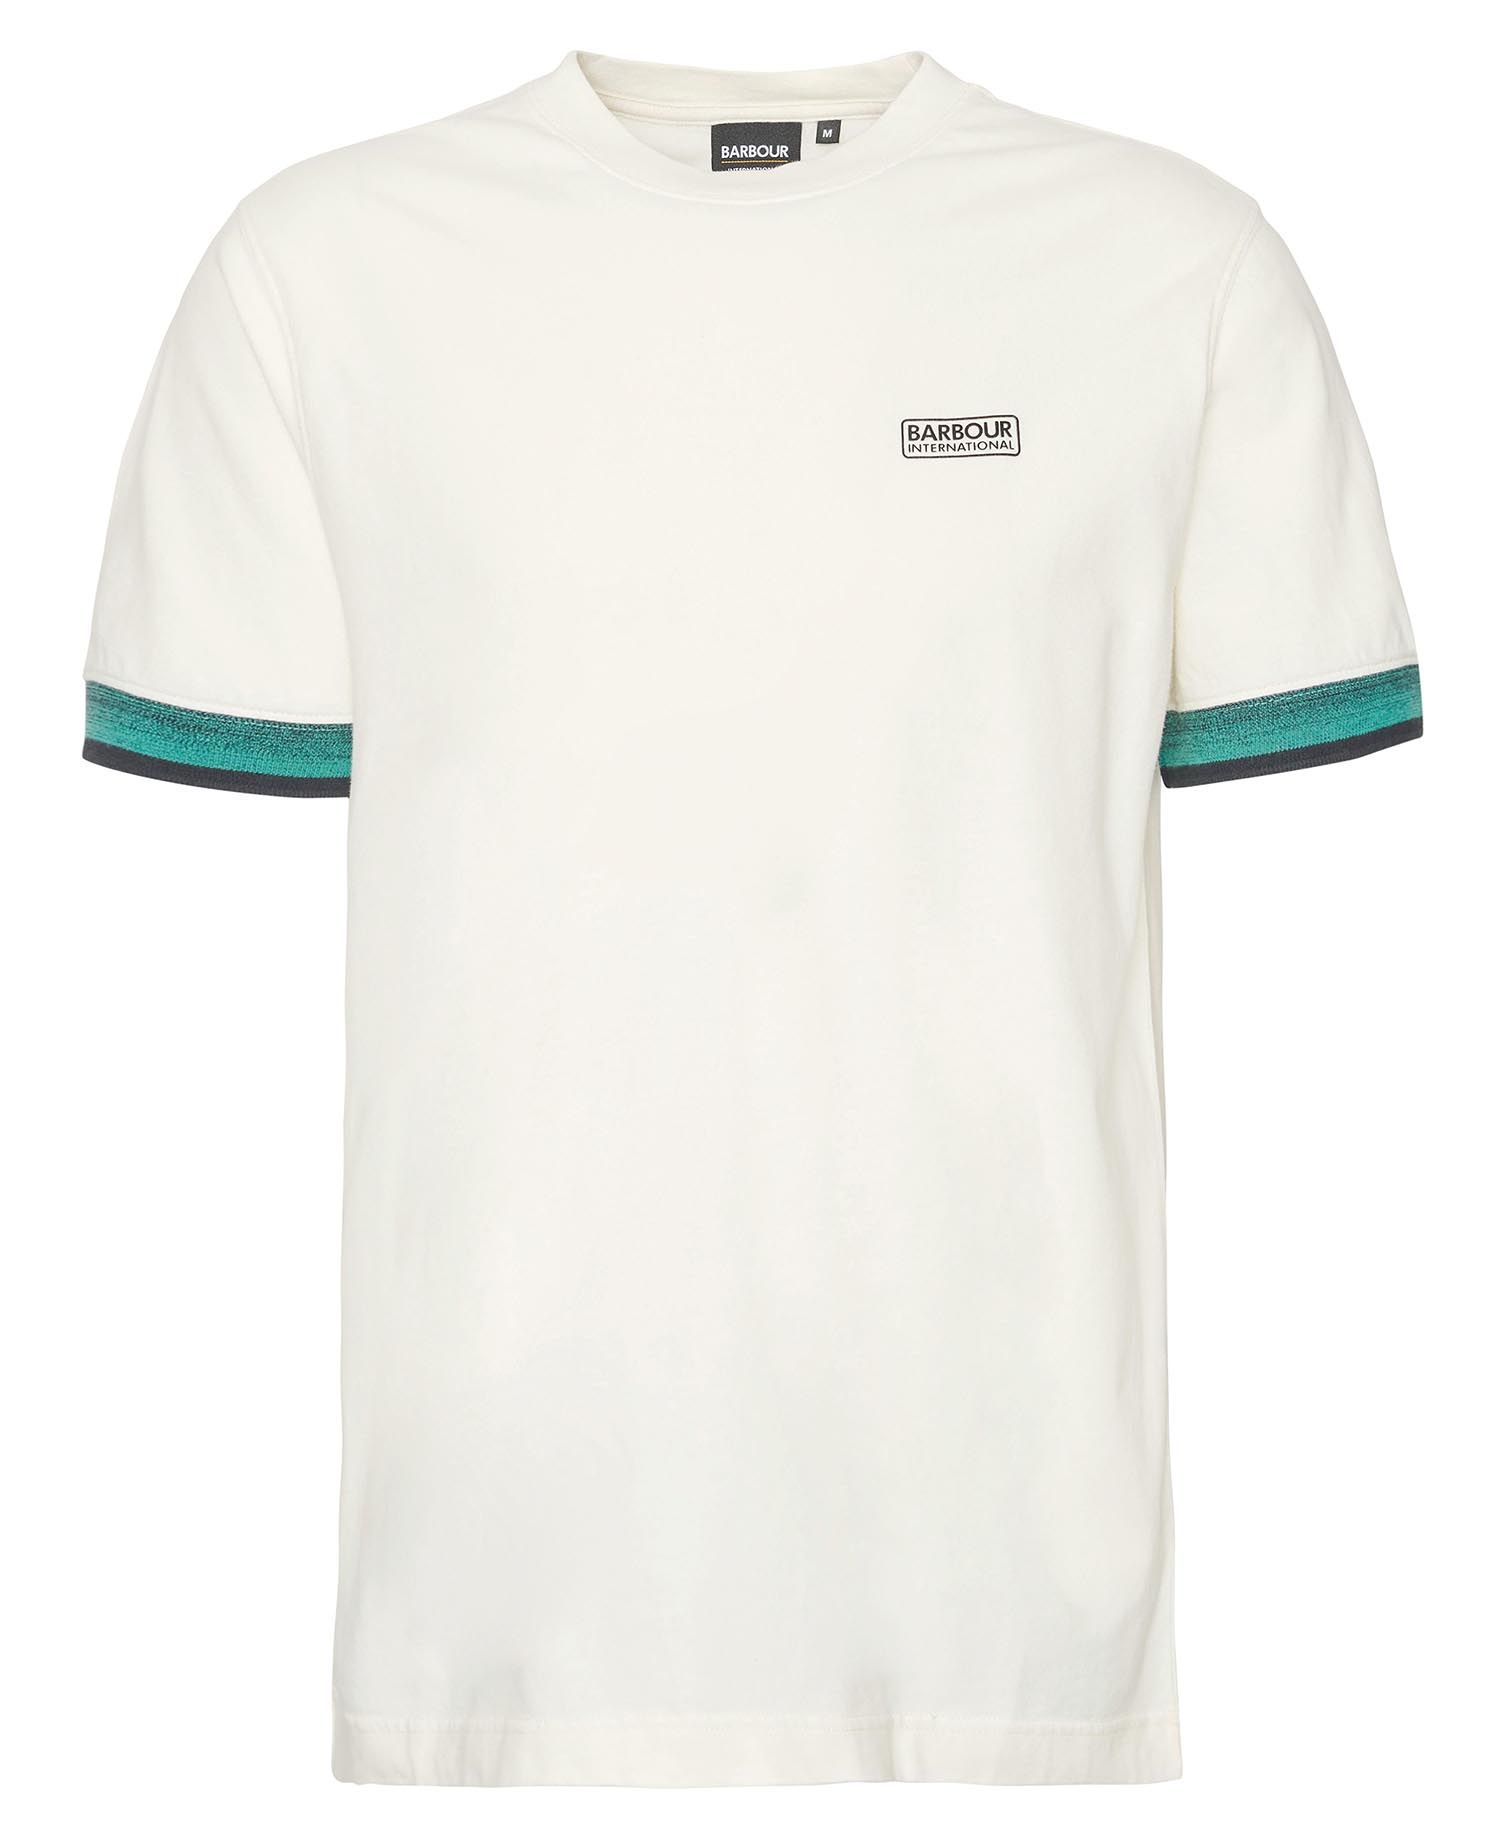 Barbour White and Green Rothko T Shirt